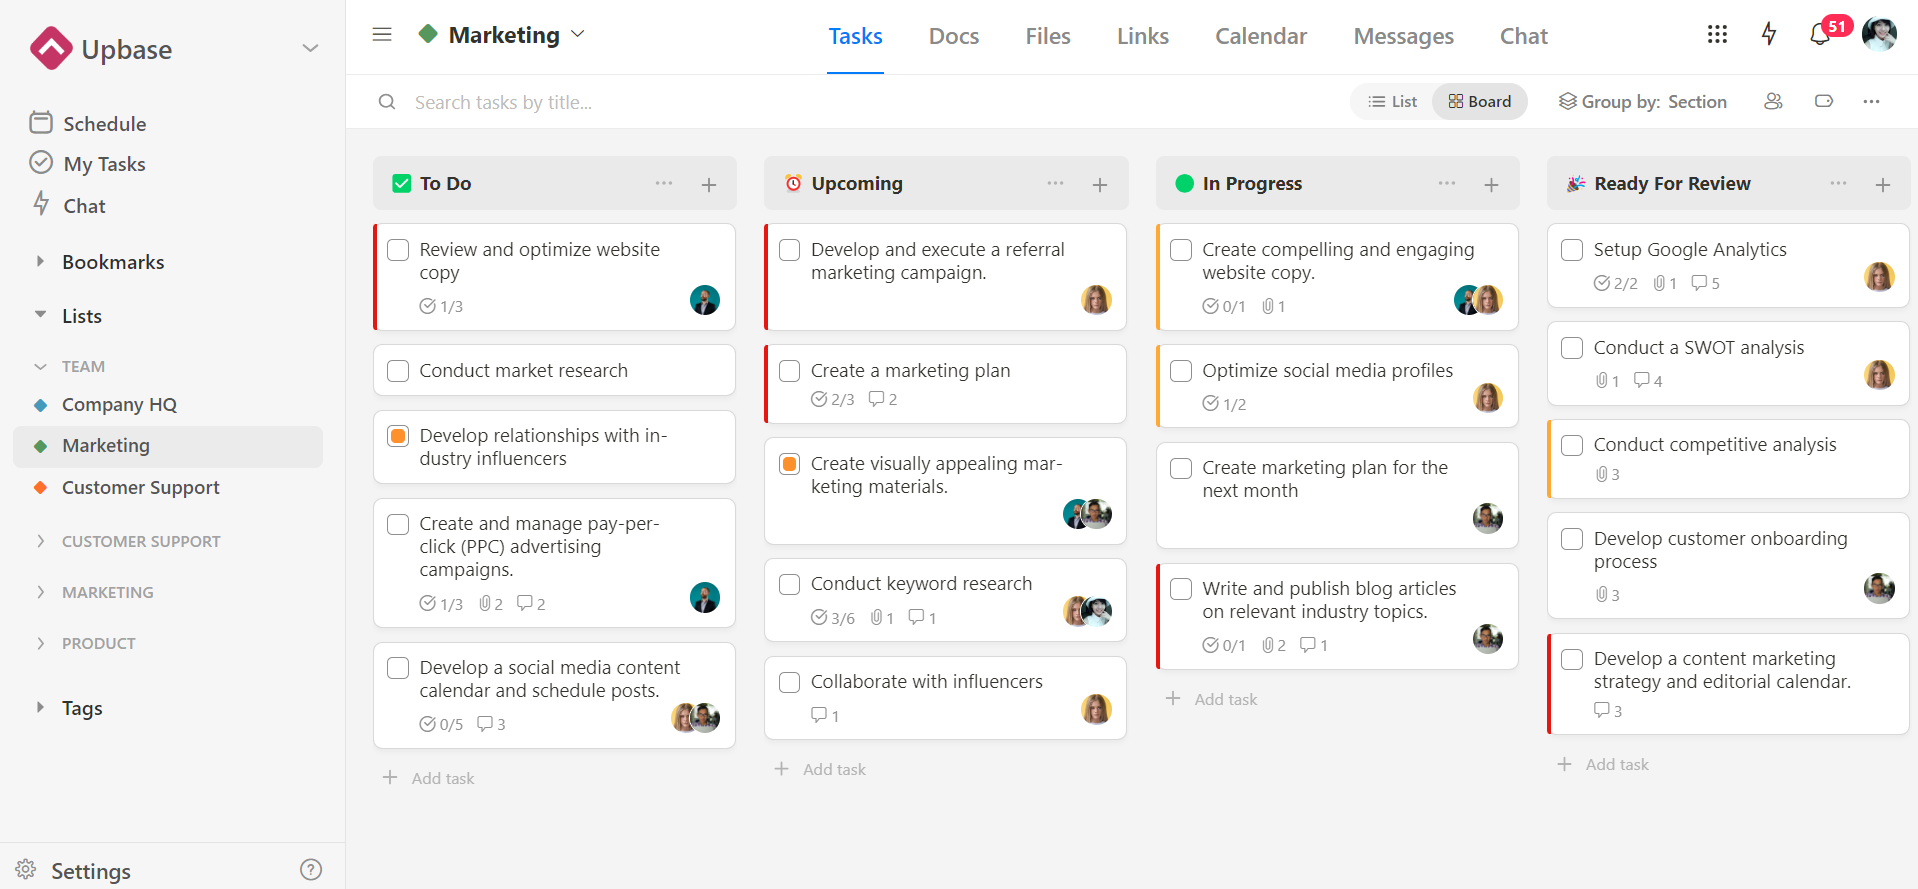 14 Best Project Management Software For Creative Agencies. #1 Upbase